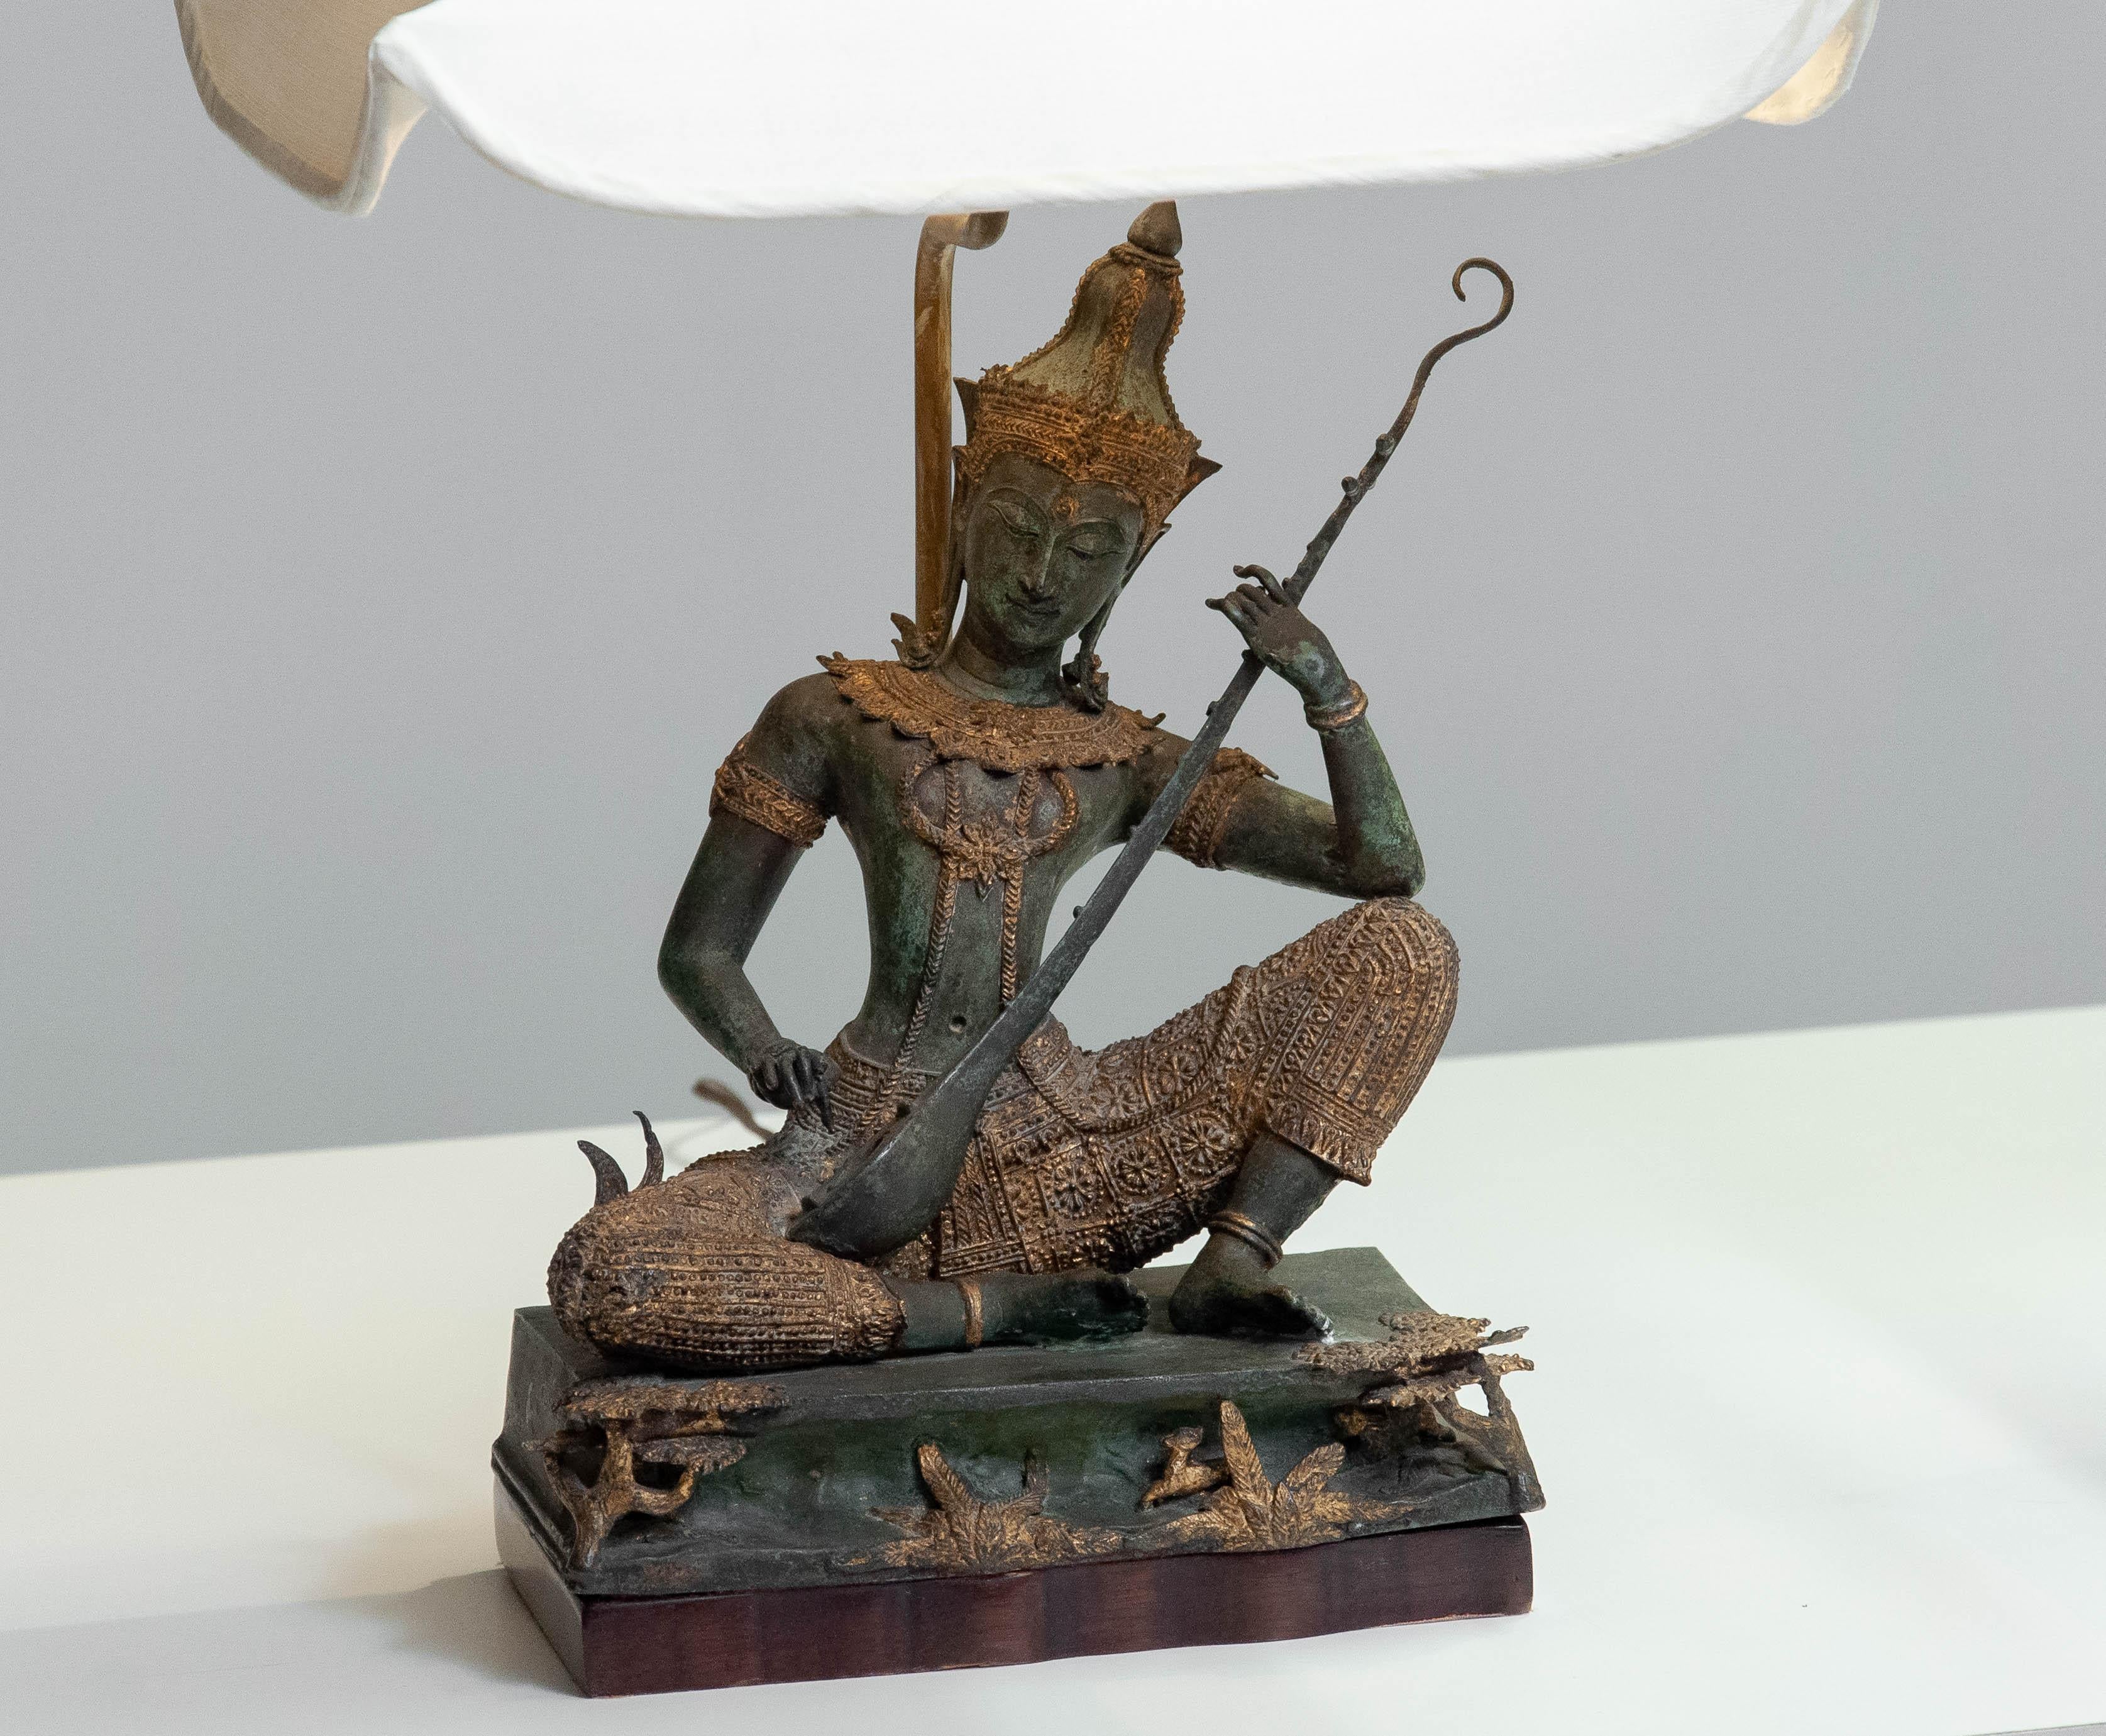 1970s Asian Vintage Table Lamps with Bronze / Gild Statues of Phra Aphai Mani In Good Condition For Sale In Silvolde, Gelderland